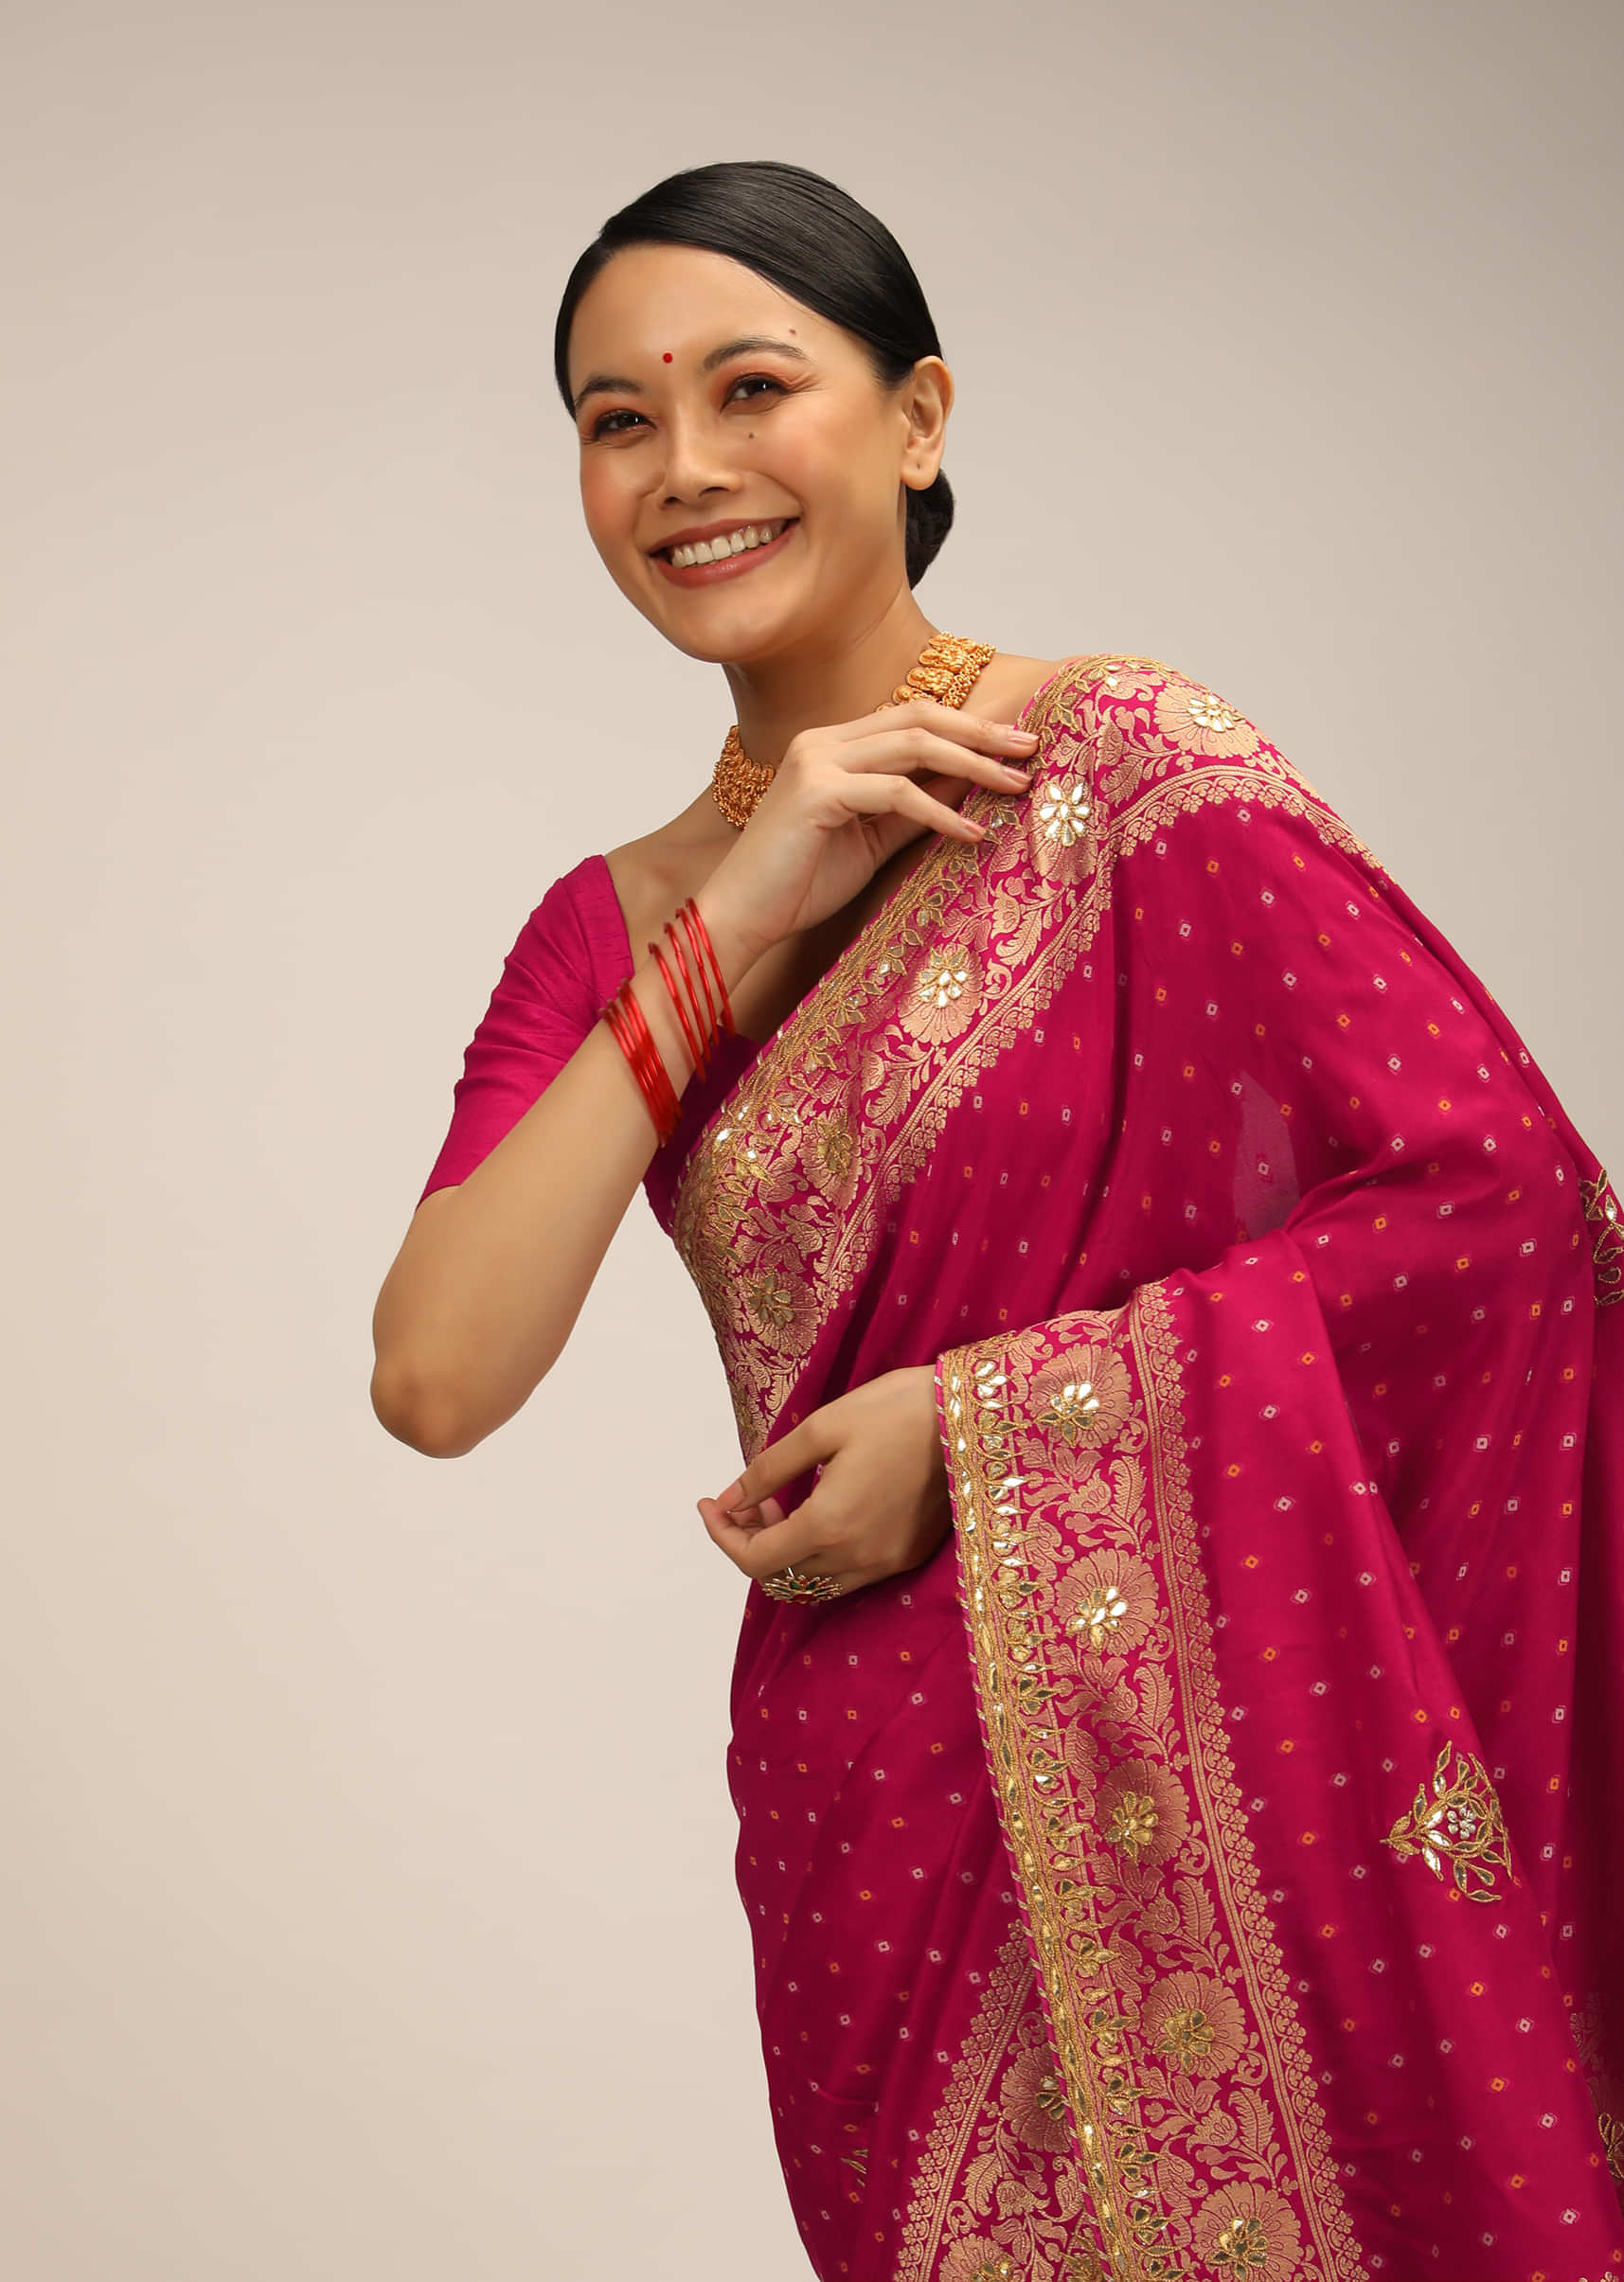 Rani Pink Saree In Silk With Brocade Geometric And Floral Design On The Pallu And Gotta Embroidery